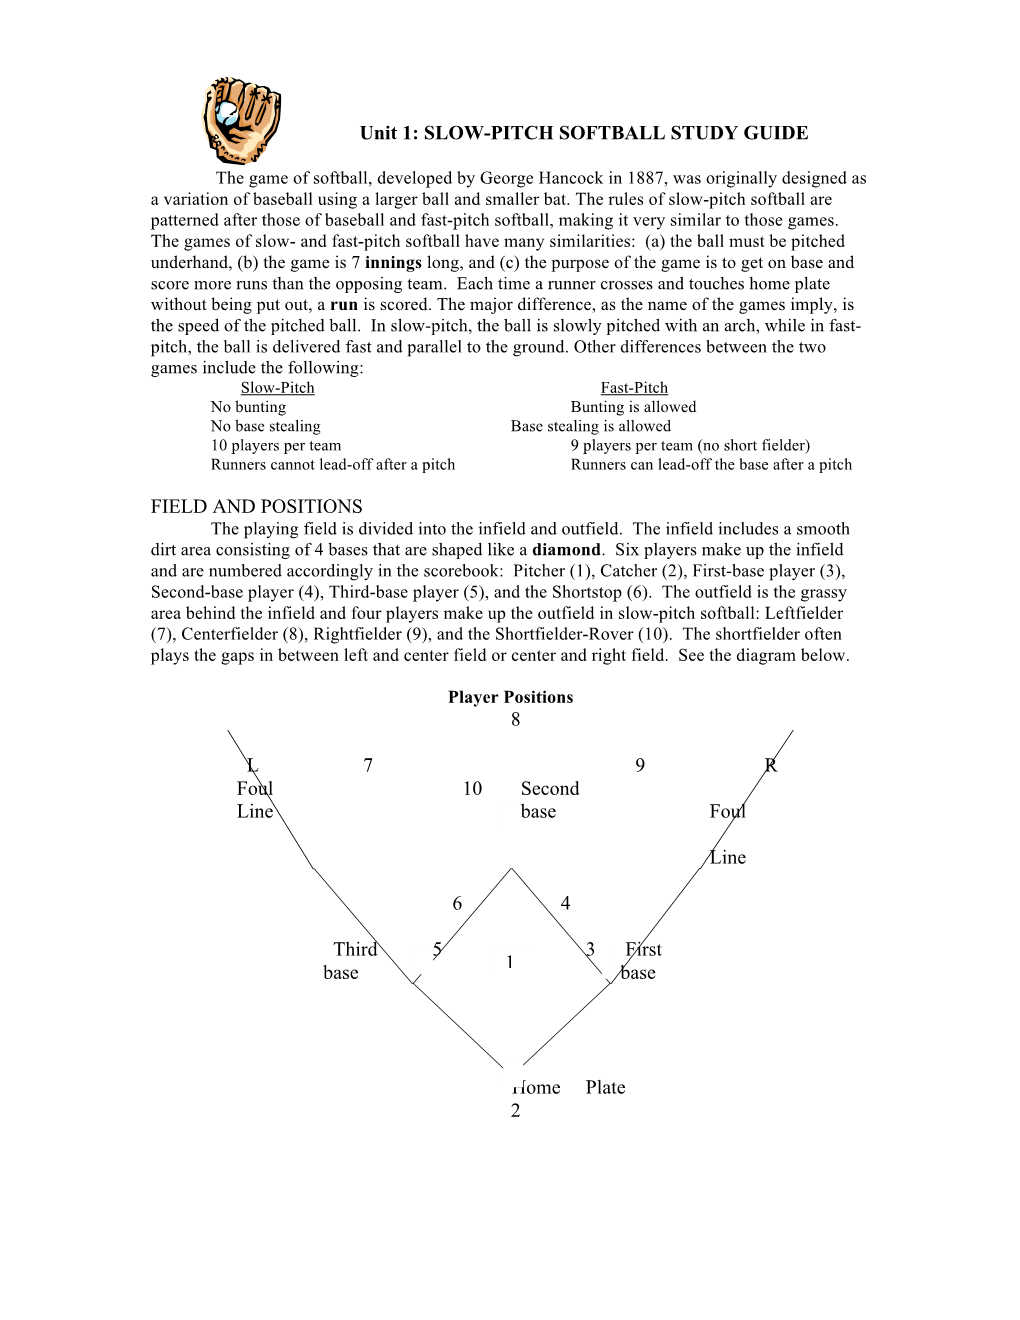 Slow-Pitch Softball Study Guide Field and Positions 8 L